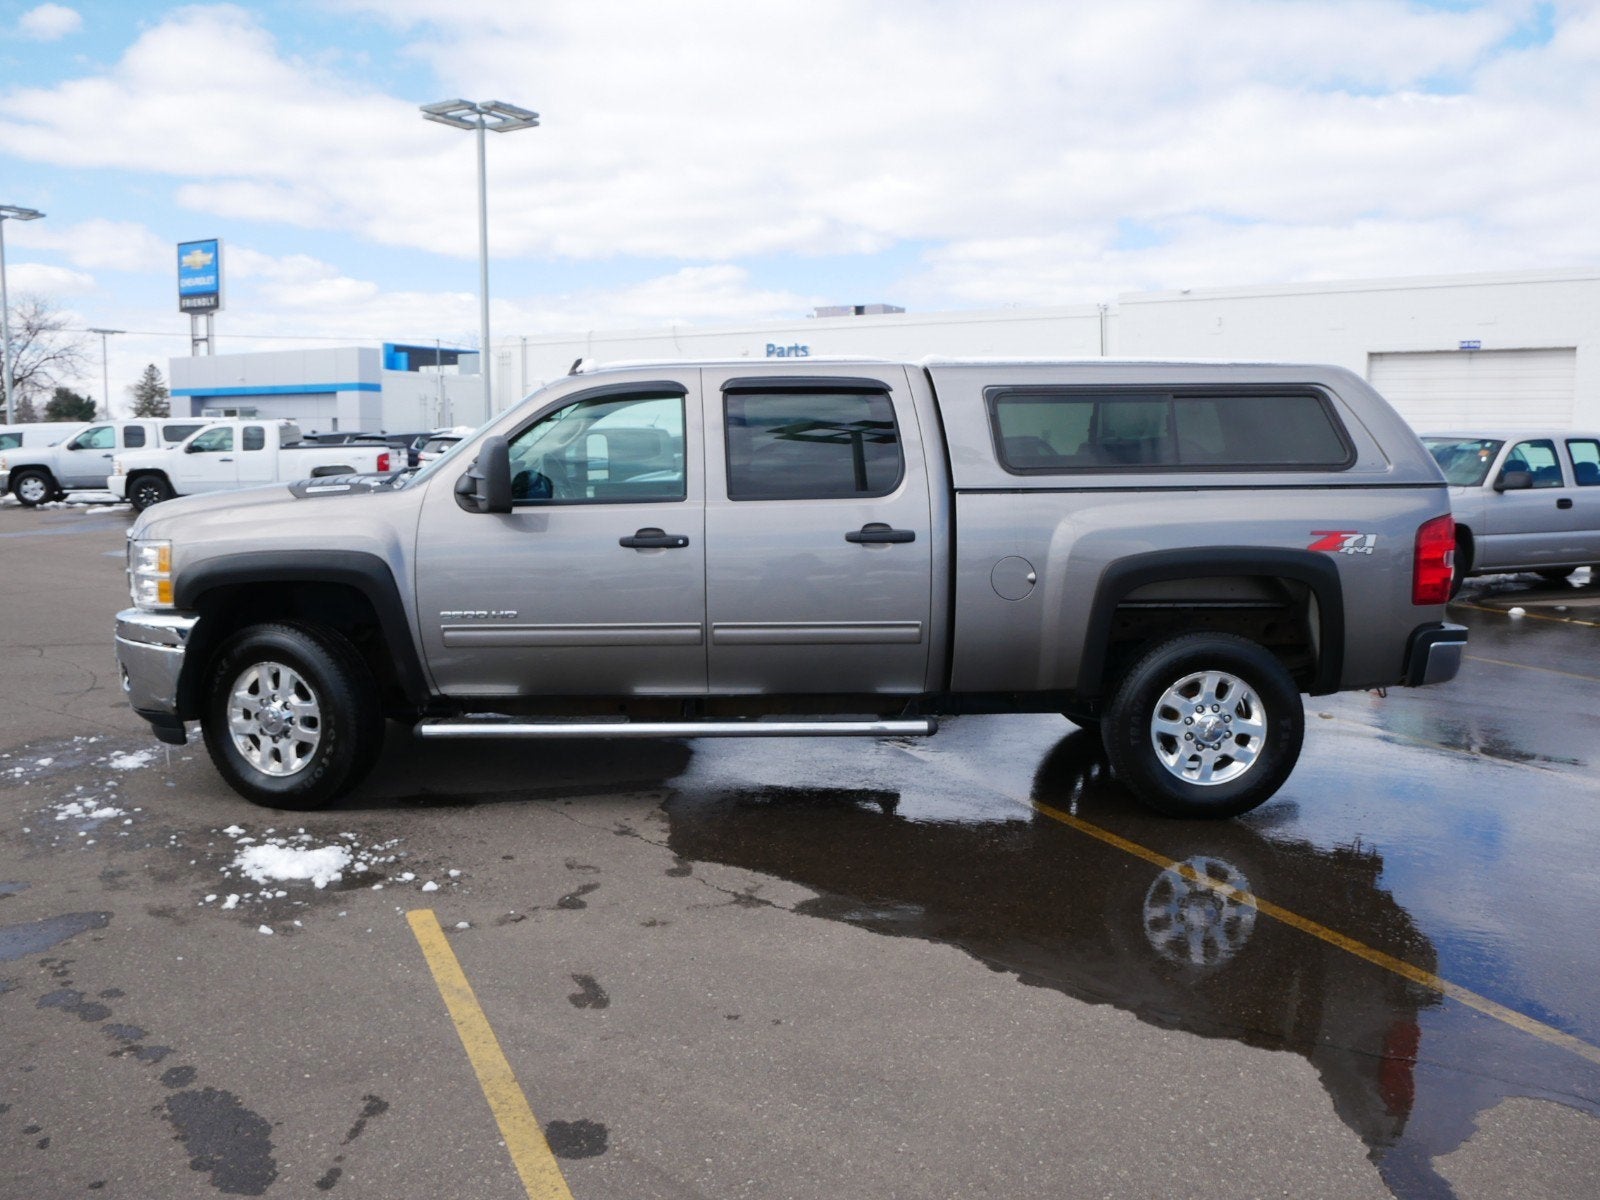 Used 2013 Chevrolet Silverado 2500HD LT with VIN 1GC1KXC86DF208136 for sale in Fridley, Minnesota